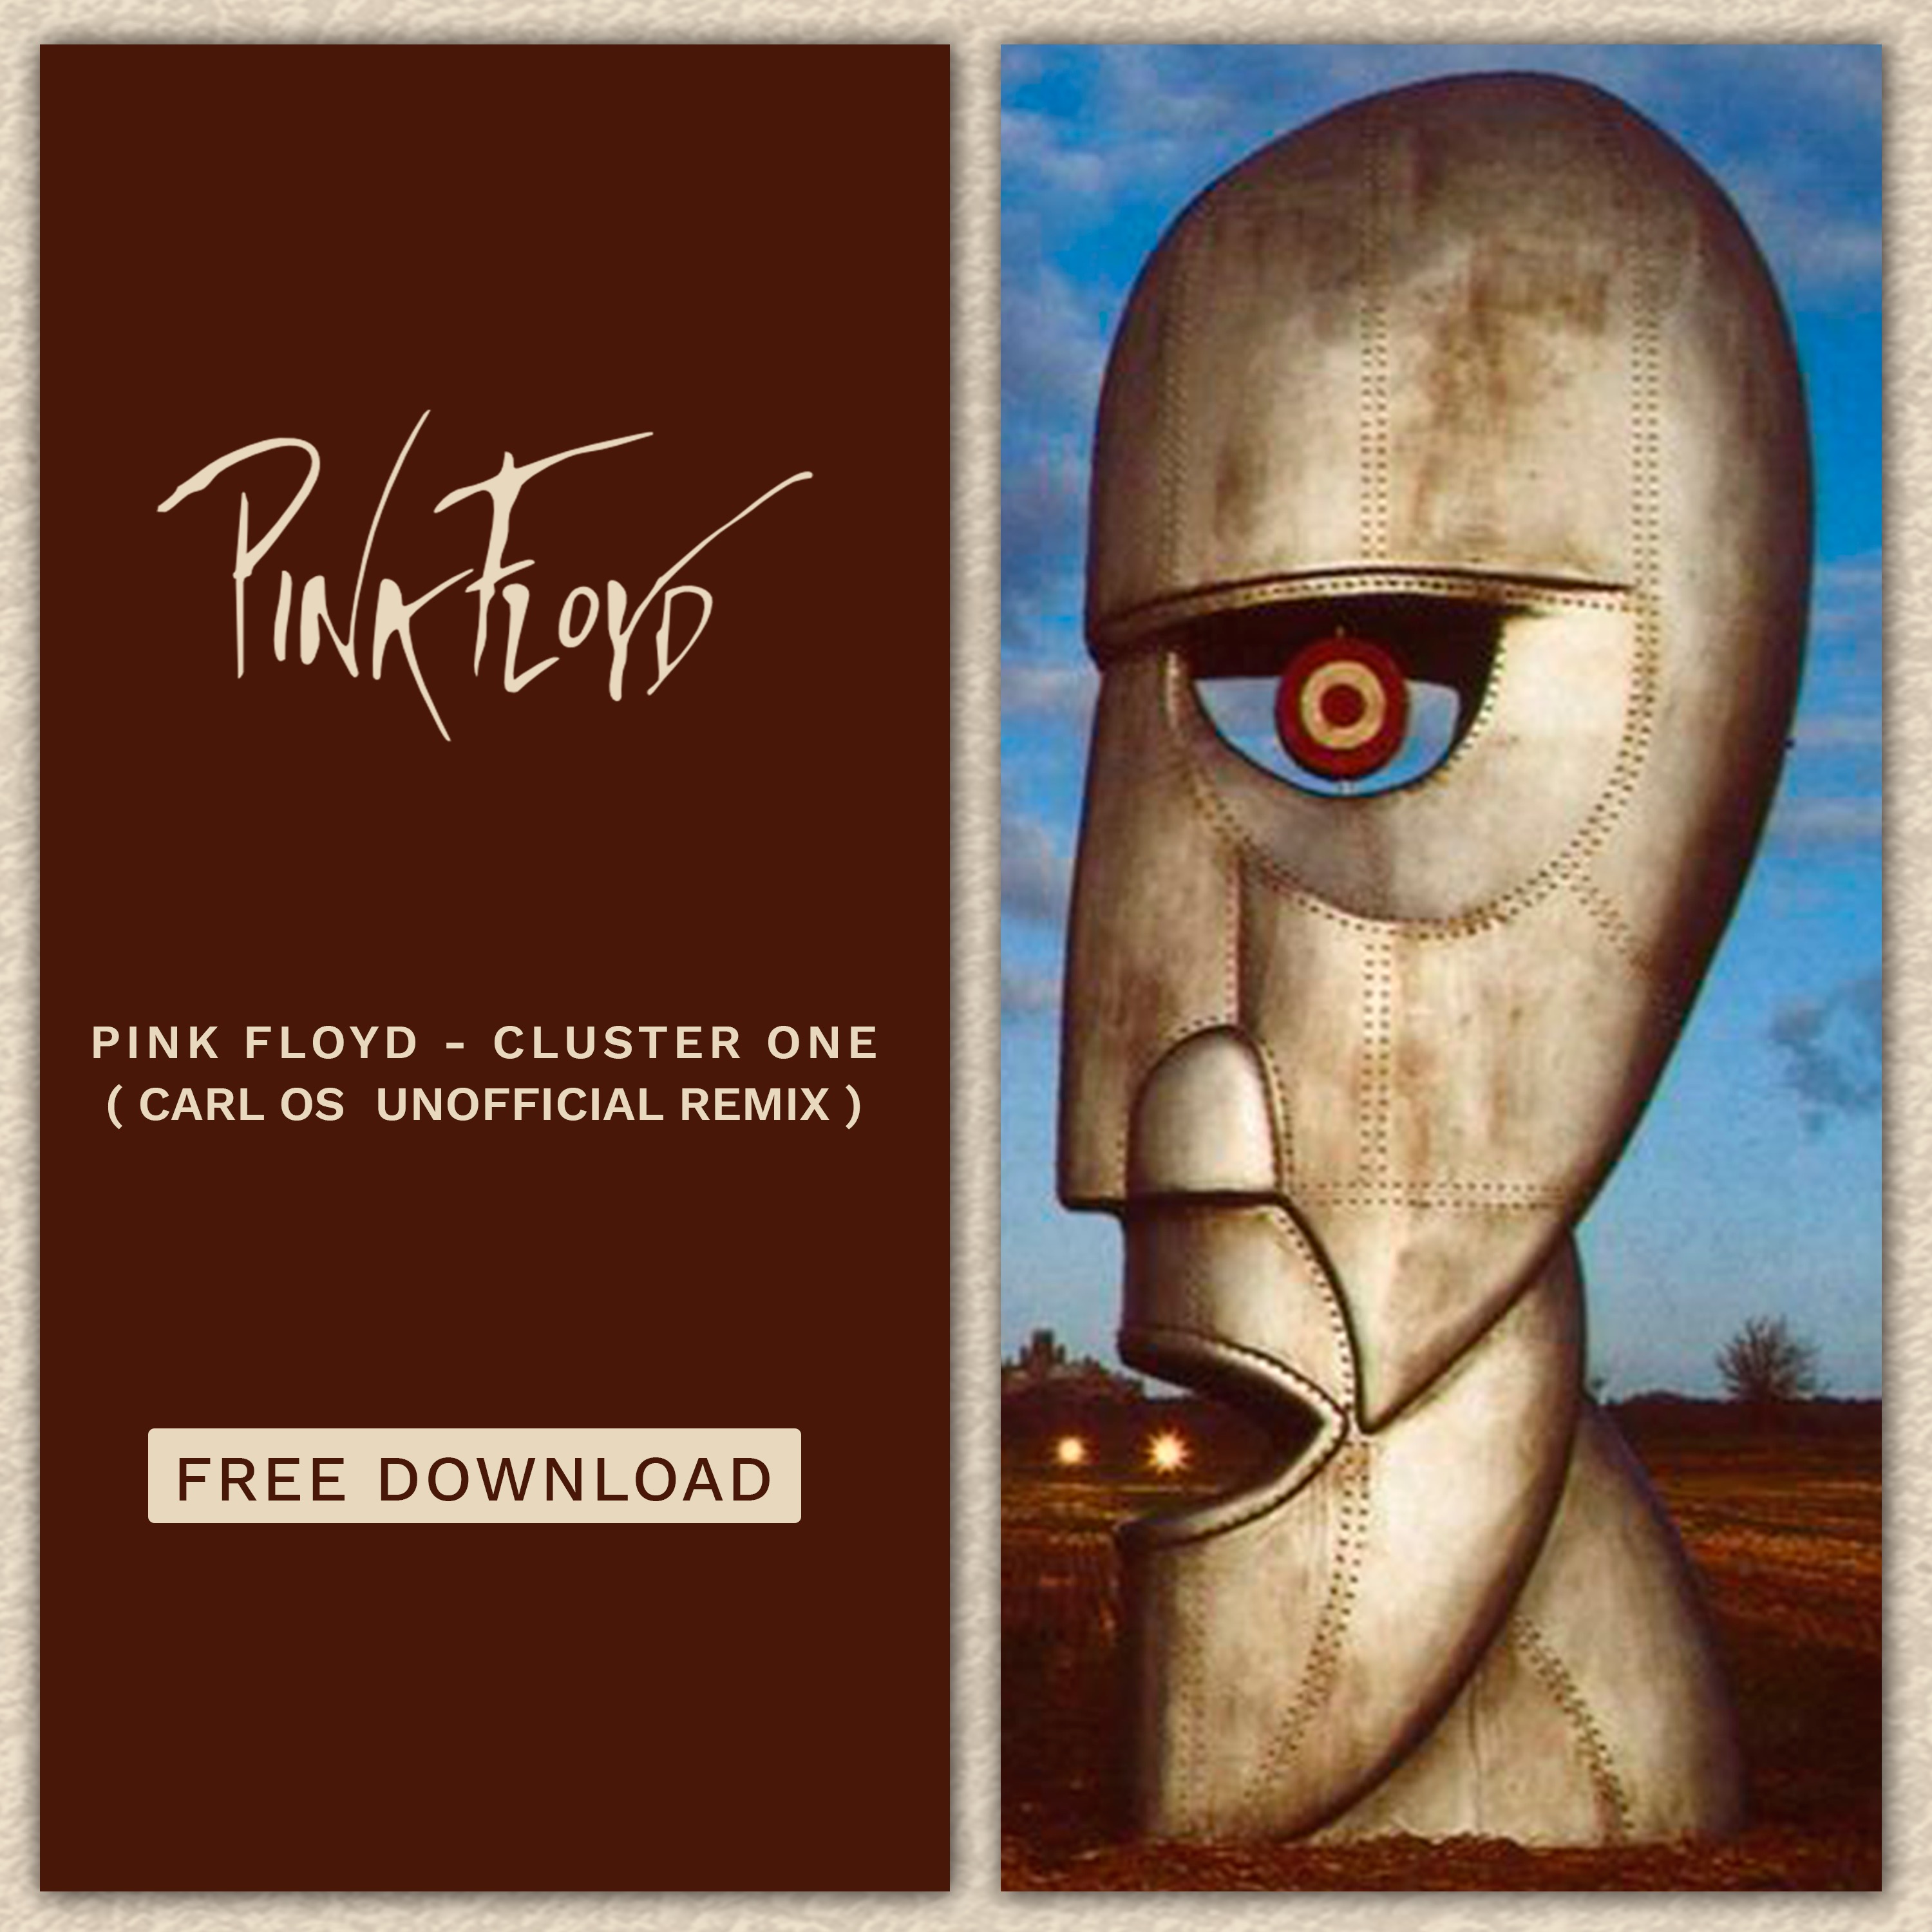 Download! FREE DOWNLOAD: Pink Floyd - Cluster One (Carl OS Unofficial Remix)